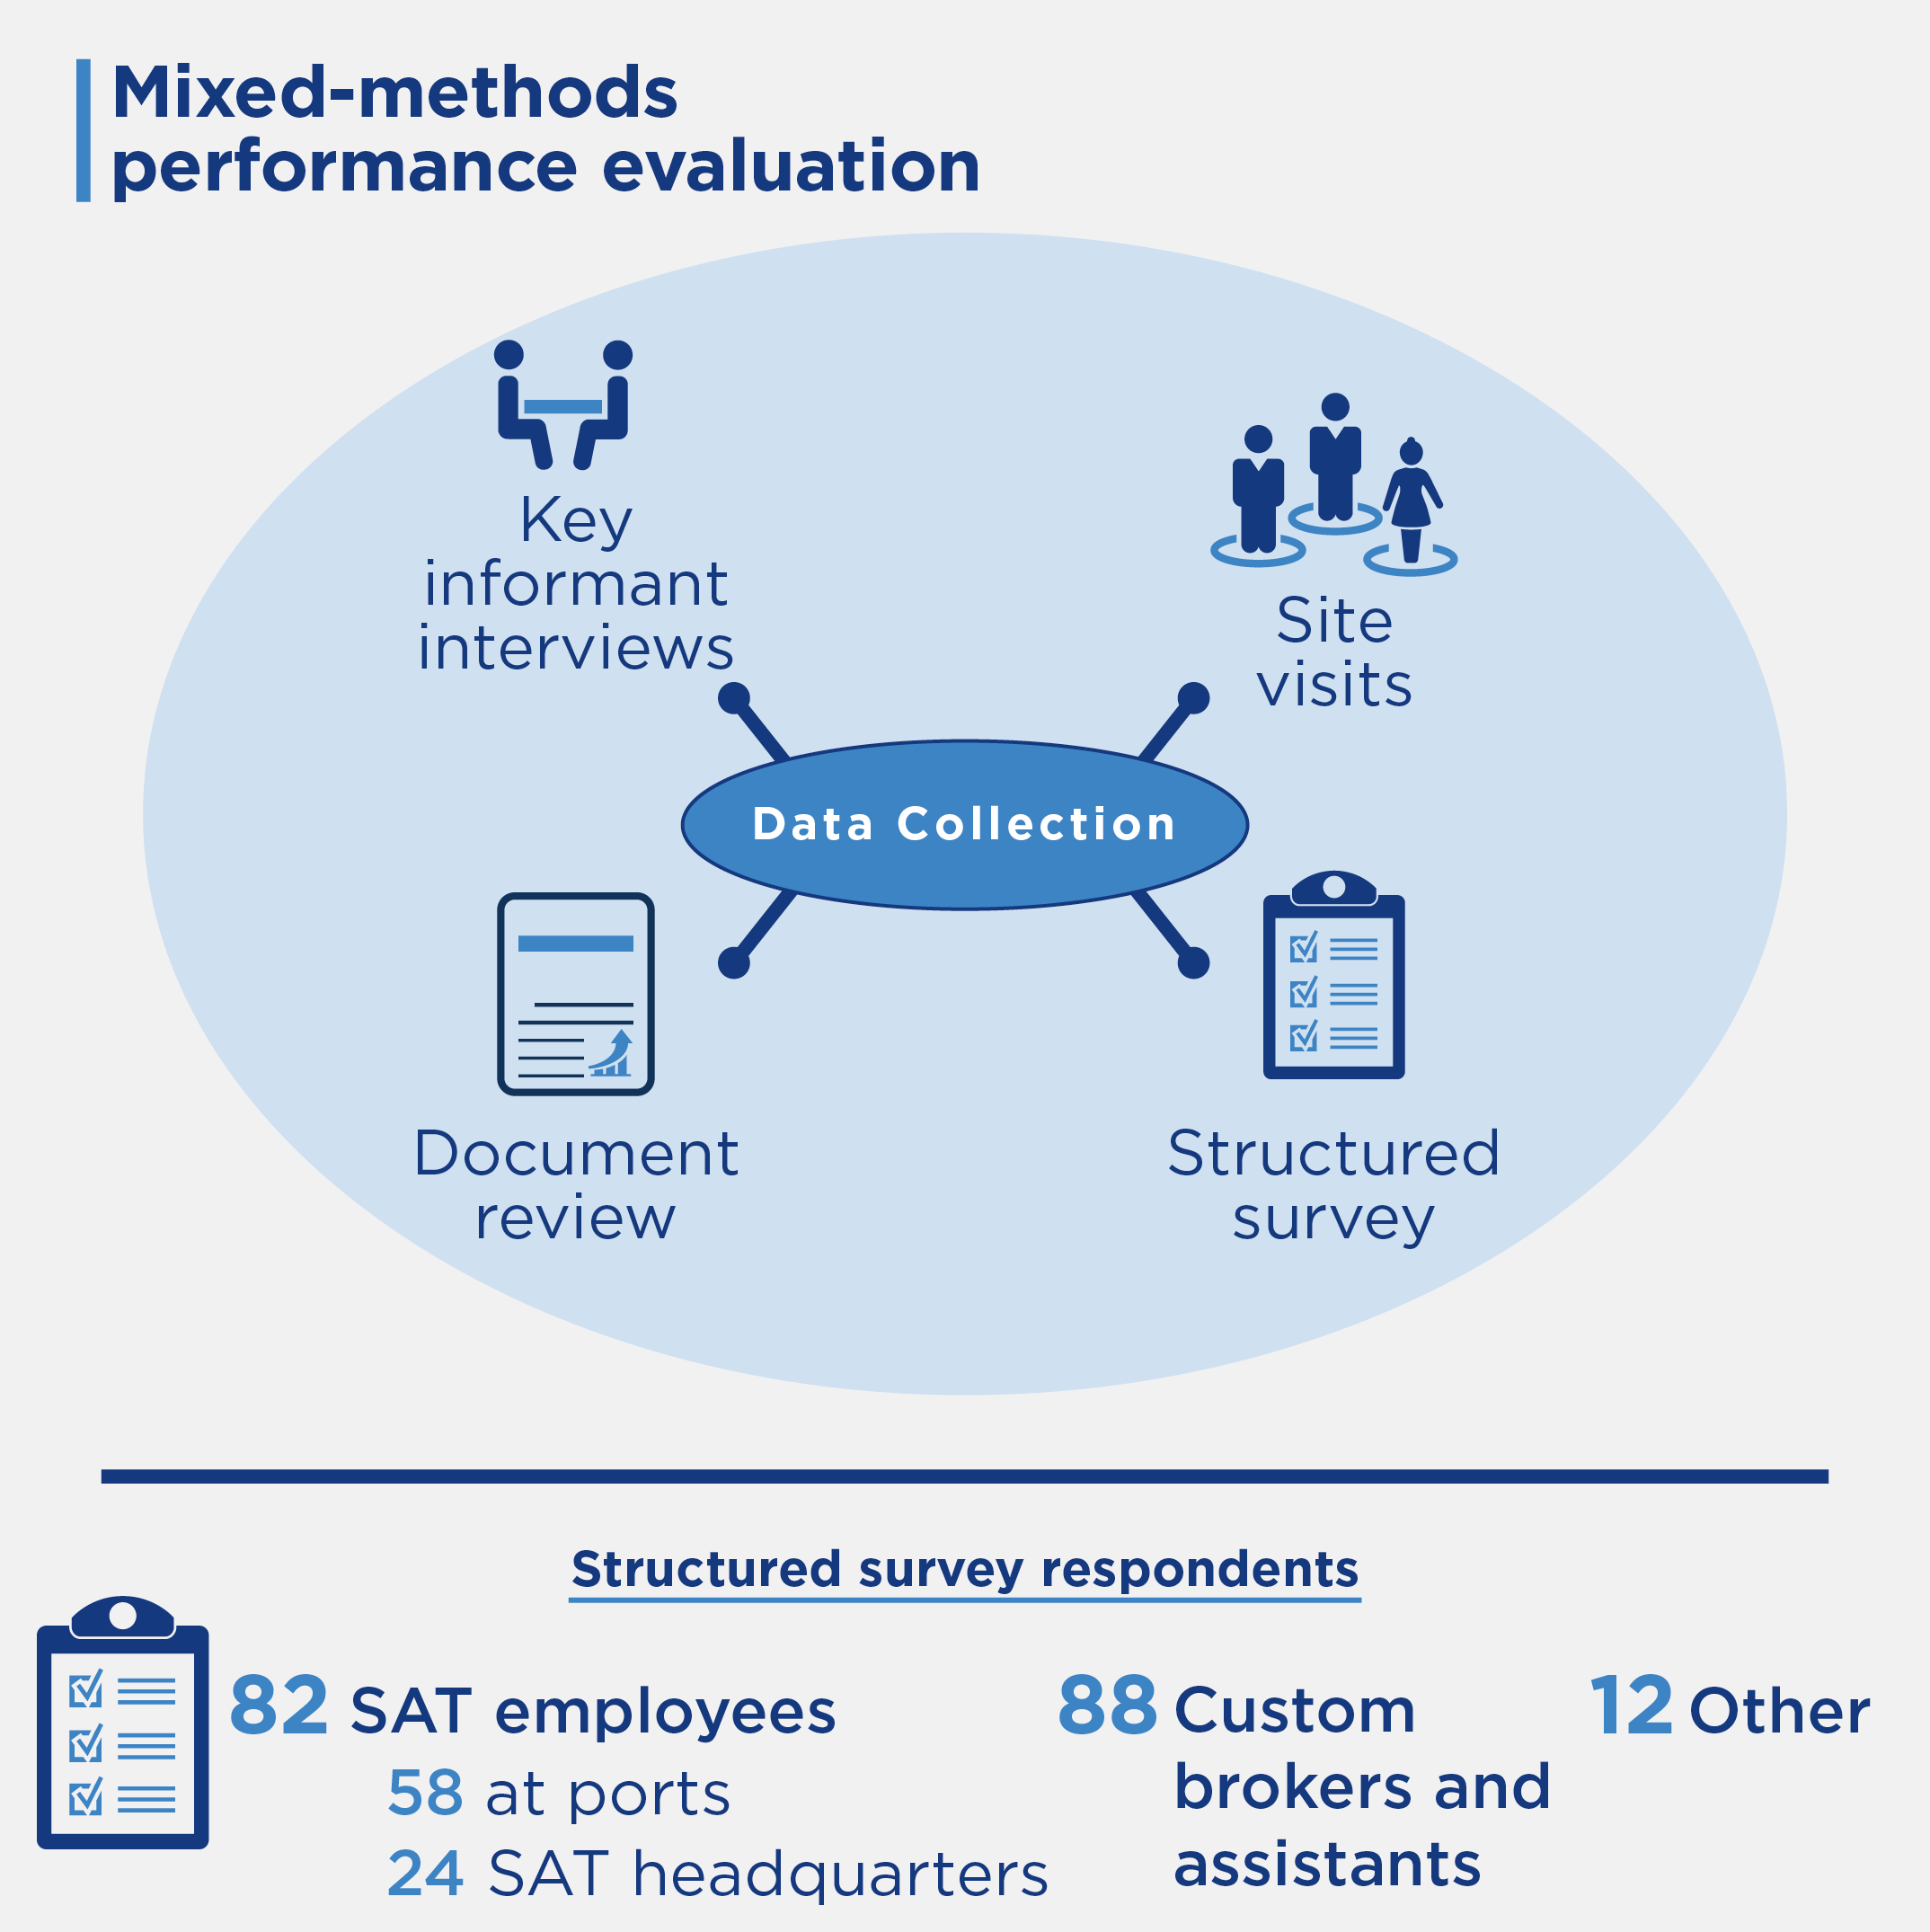 This was a mixed-methods performance evaluation. Data collection was through key informant interviews, site visits, document review and a structured survey. For the survey, 82 respondents were SAT employees; 88 were custom brokers and assistants, and 12 were 'other.' 